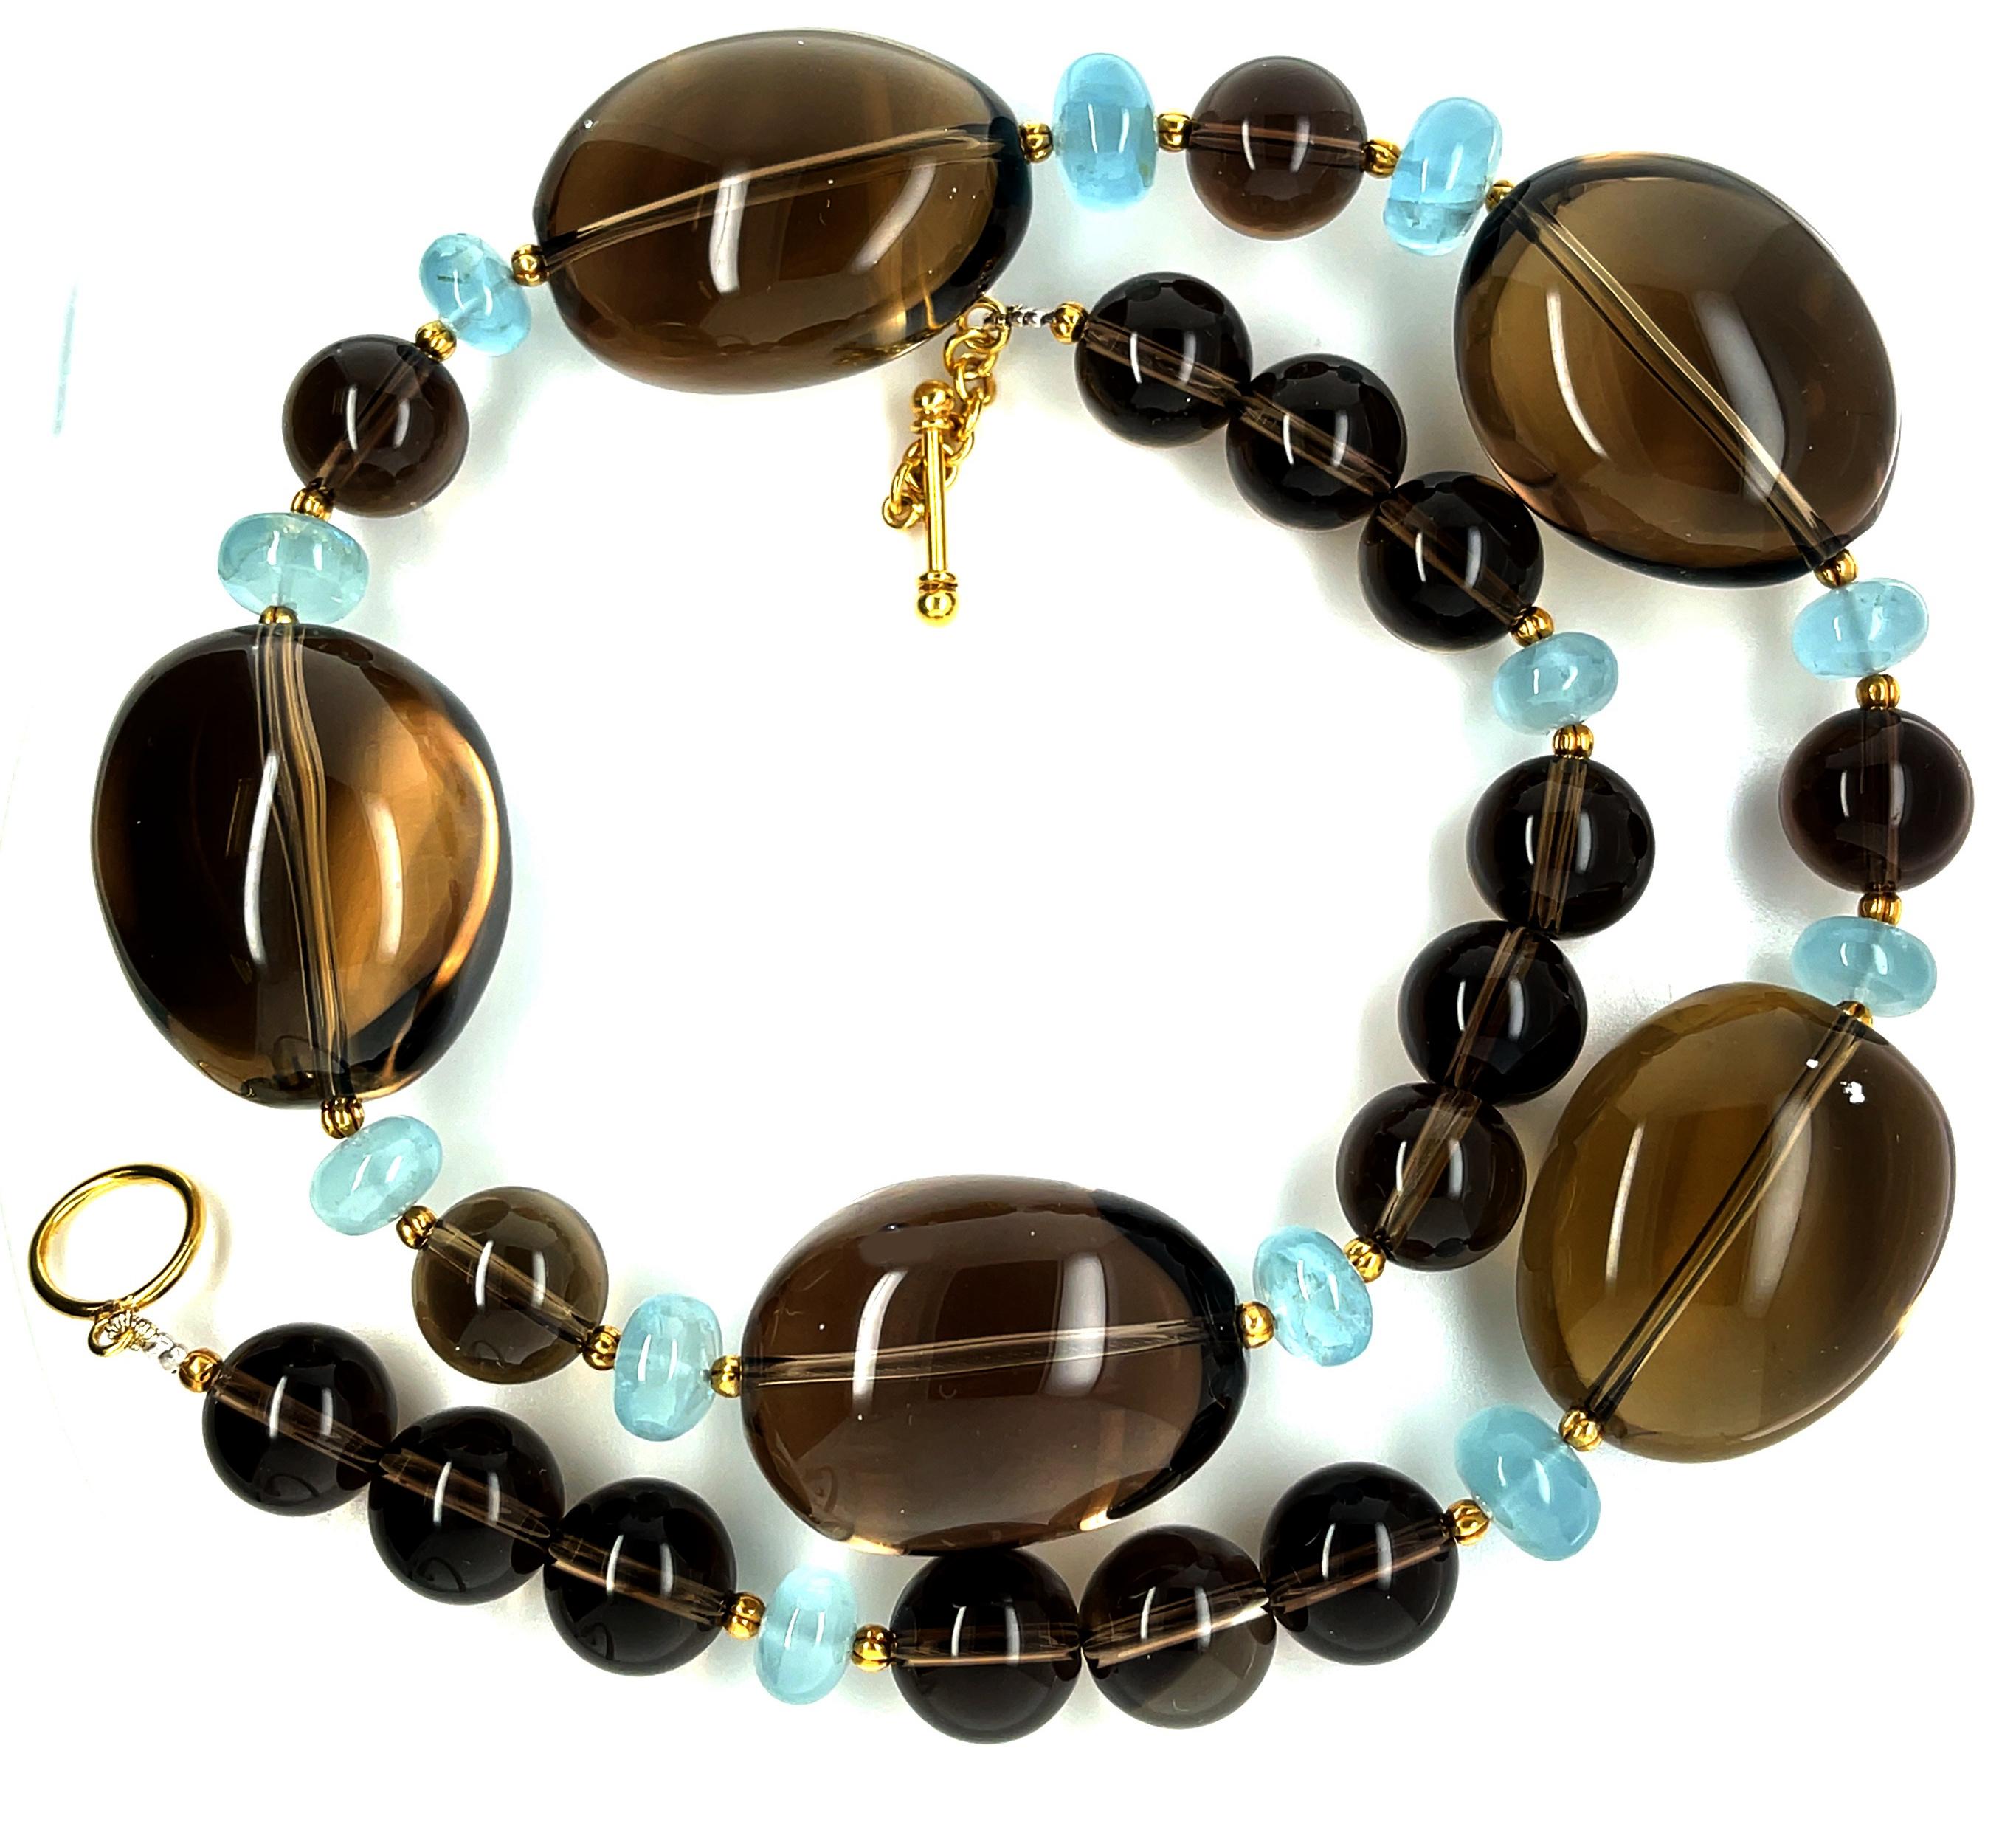 A gorgeous color pairing of warm toffee brown with cool sea glass blue is mesmerizing in this sophisticated and eye-catching necklace that combines smoky quartz with aquamarine and 18k yellow gold. Large, smoky quartz oval crystals have been